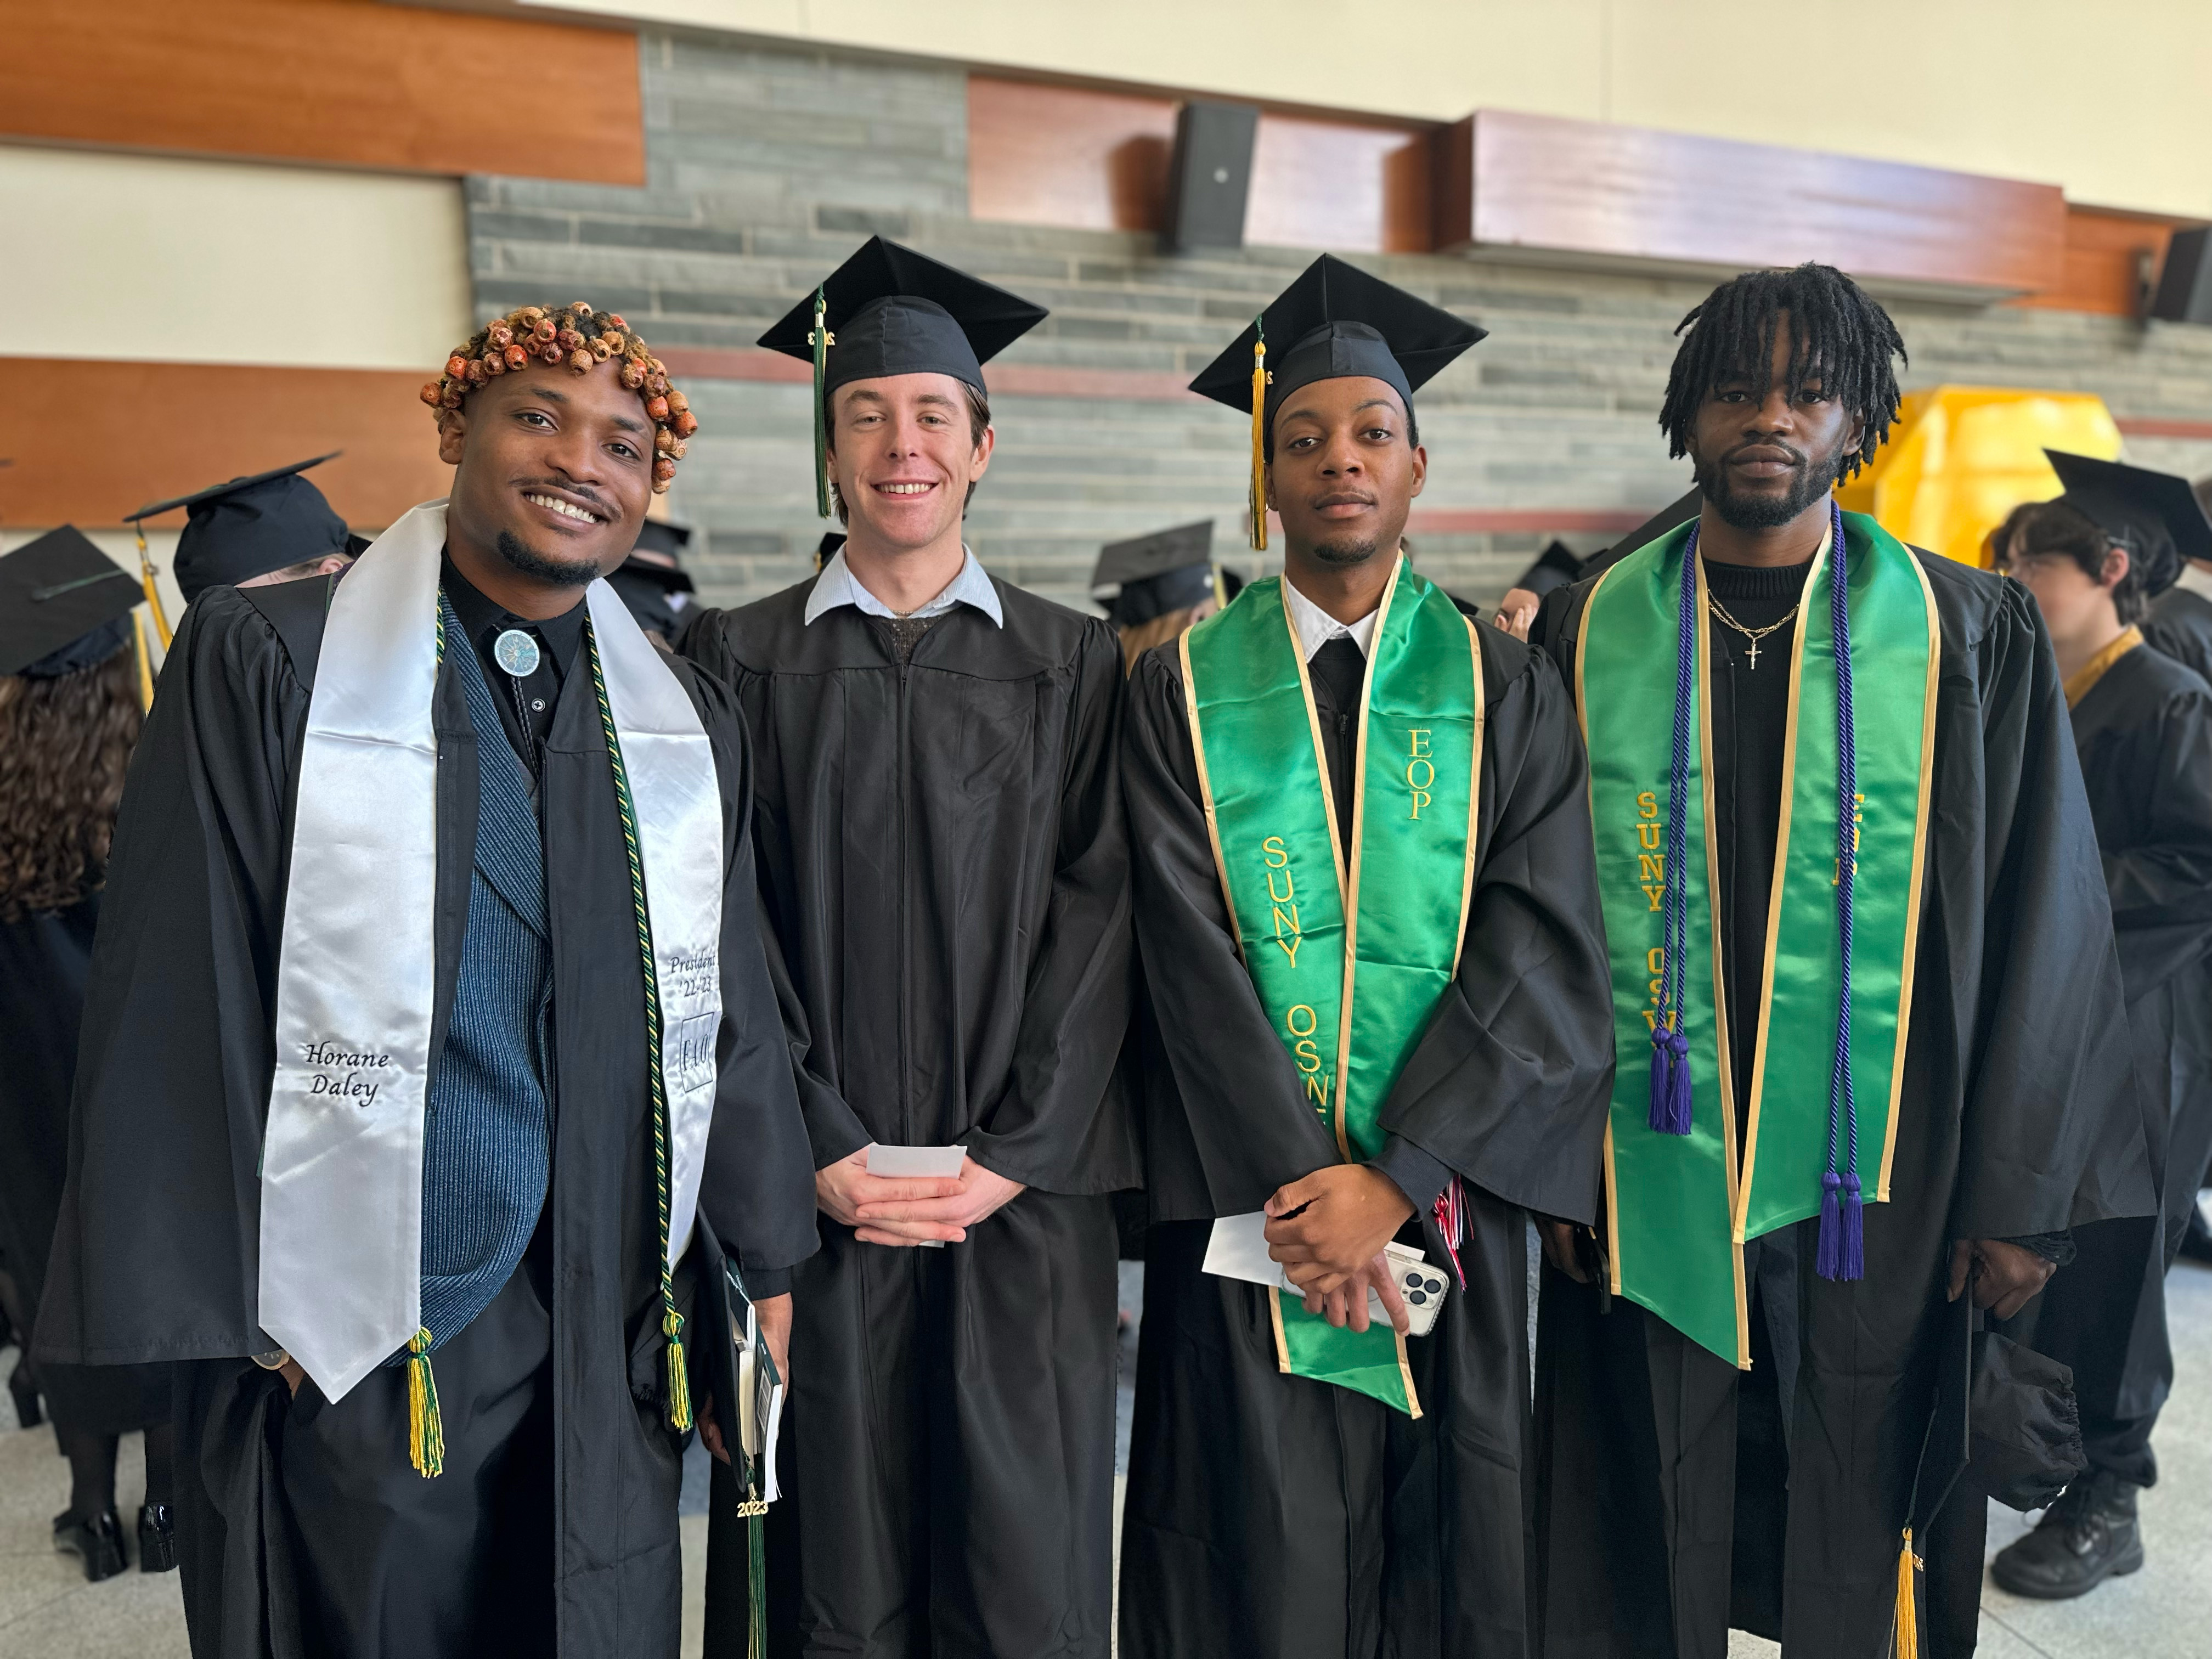 Students taking part in December Commencement gather for photos and conversation before lining up by school in the Marano Campus Center food and activity court.